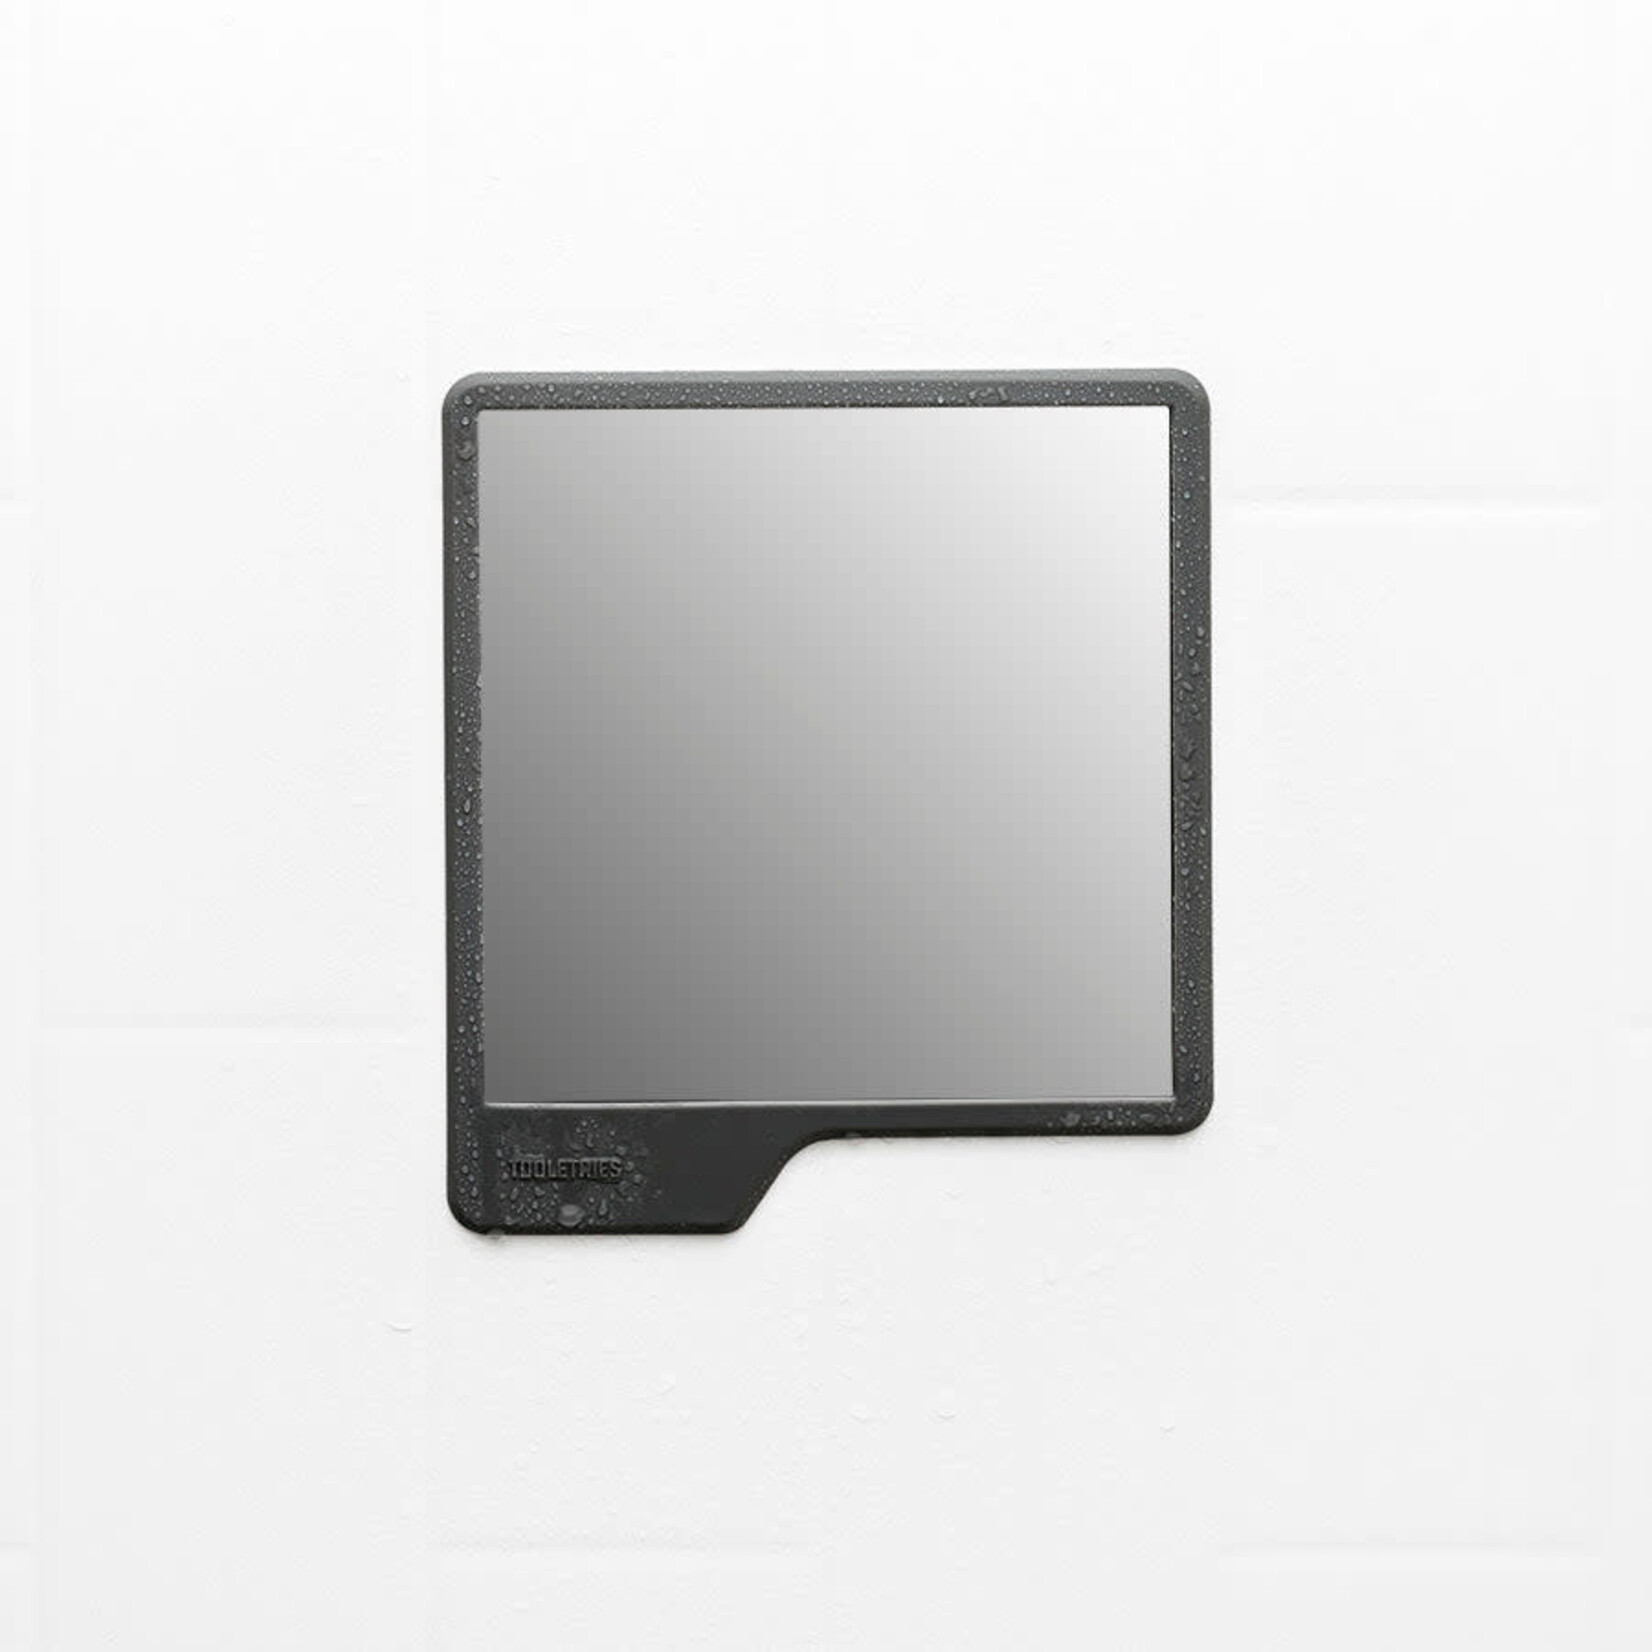 Tooletries Tooletries The Oliver Shower Mirror Charcoal